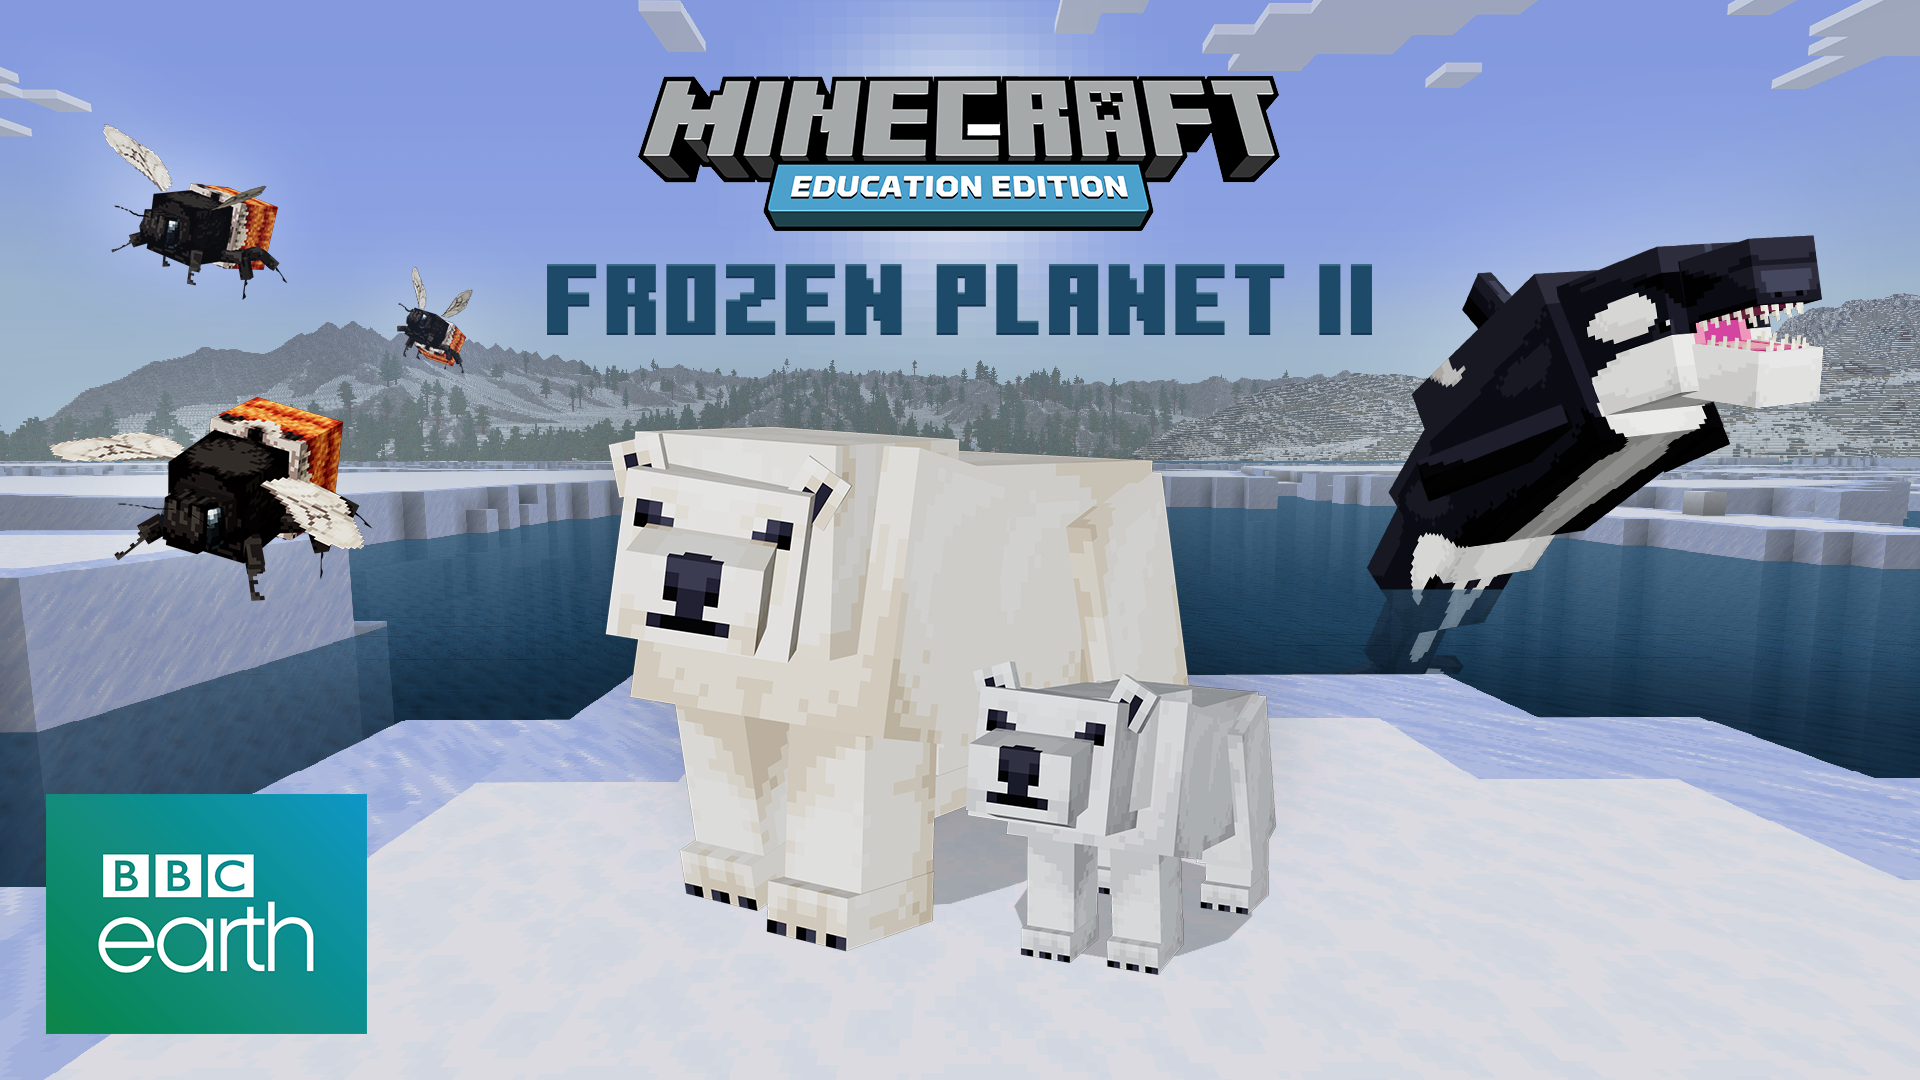 Minecraft partners with Frozen Planet 2, launching engaging new worlds to enable teach more youthful audiences